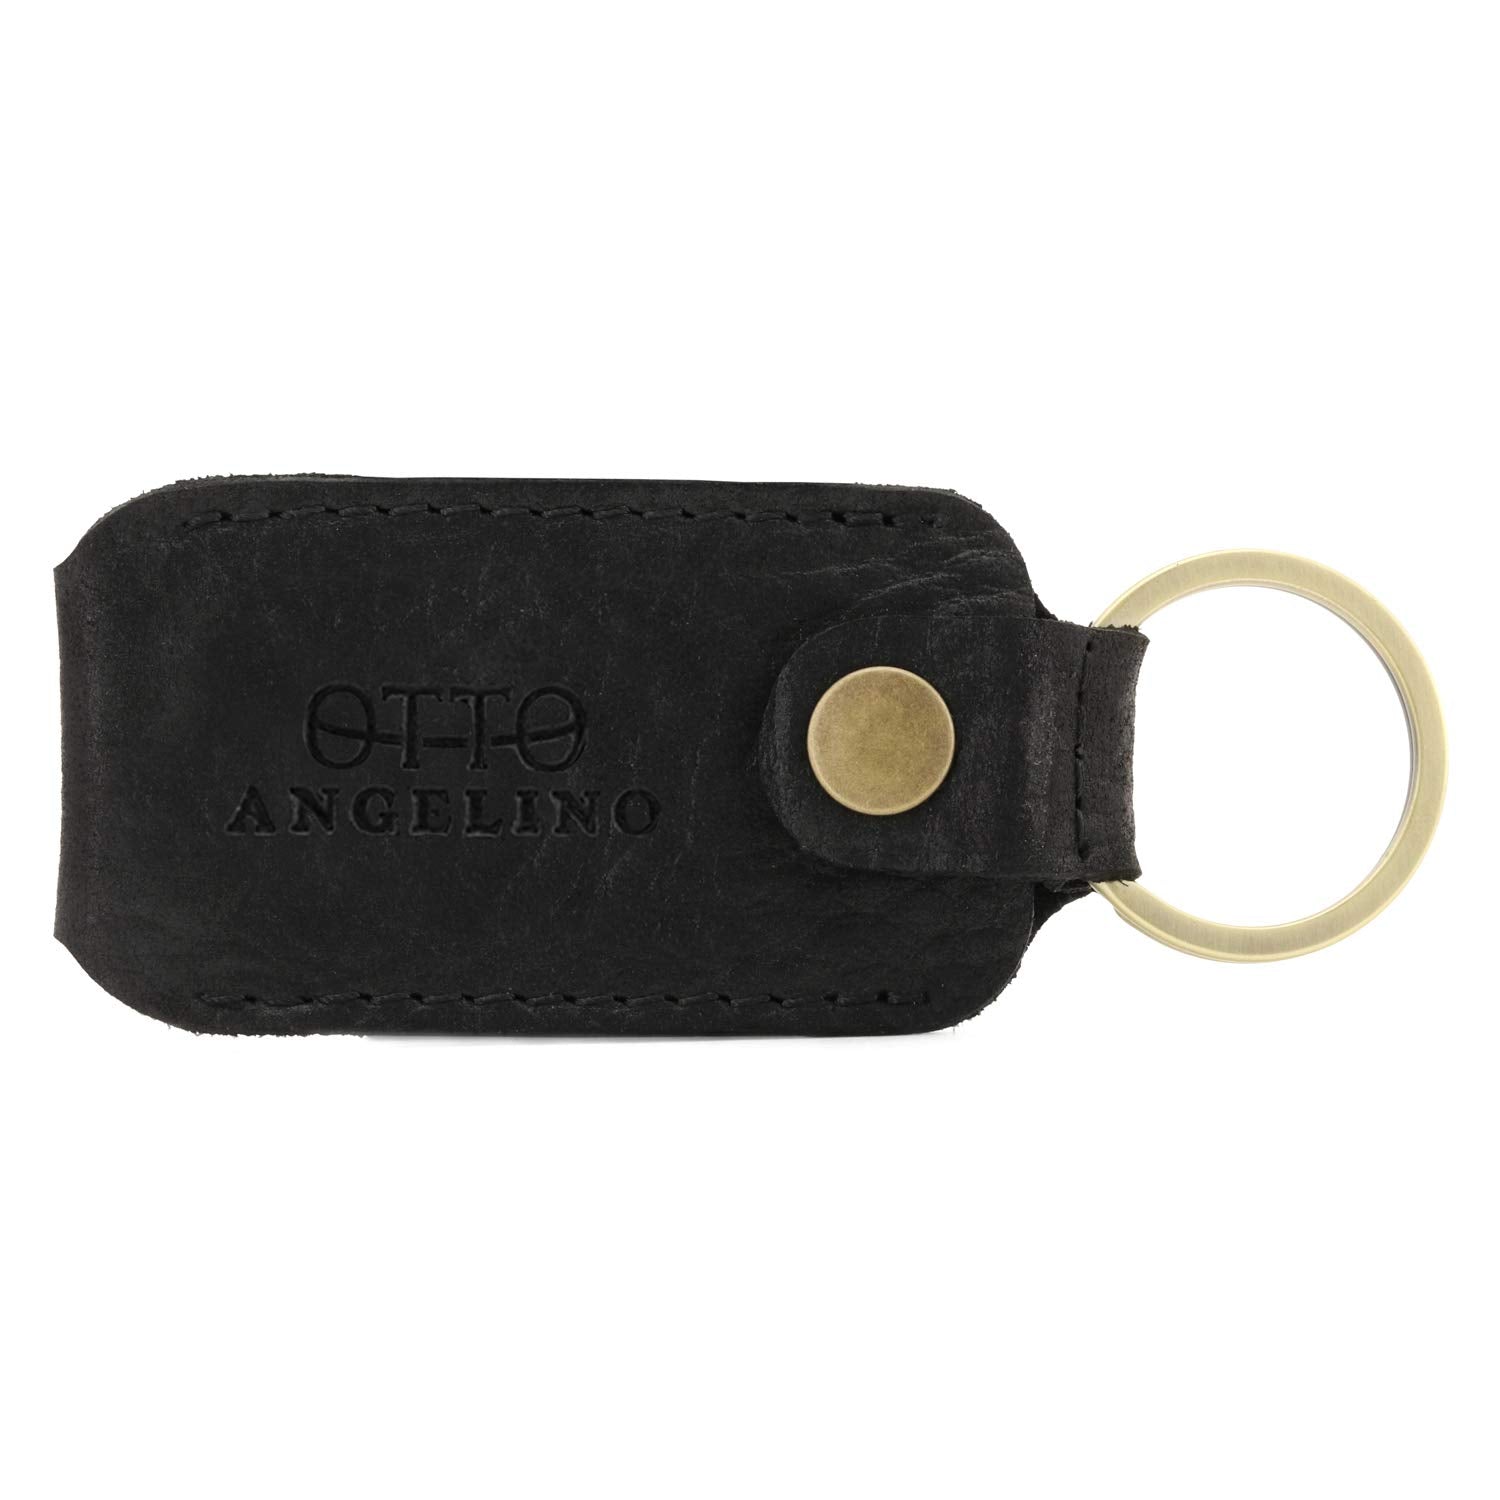 Handmade Real Leather Ledger Nano X Wallet Belt Case in Black With Snap  Fastener Button. 